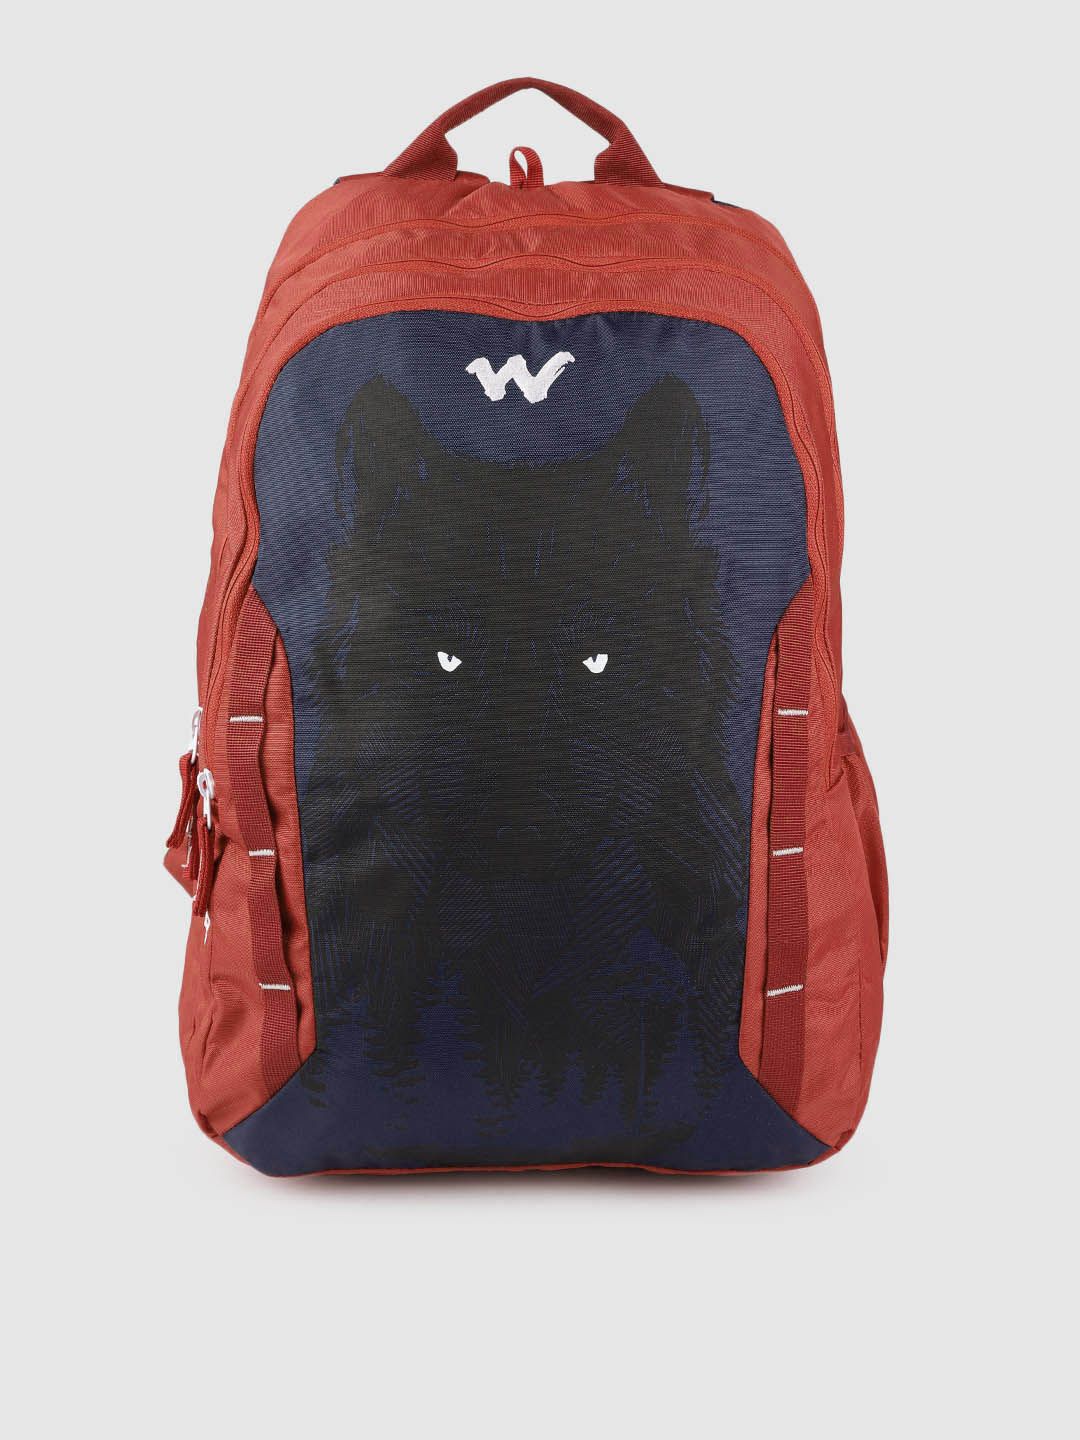 Wildcraft Unisex Red Daredevil Graphic Backpack Price in India